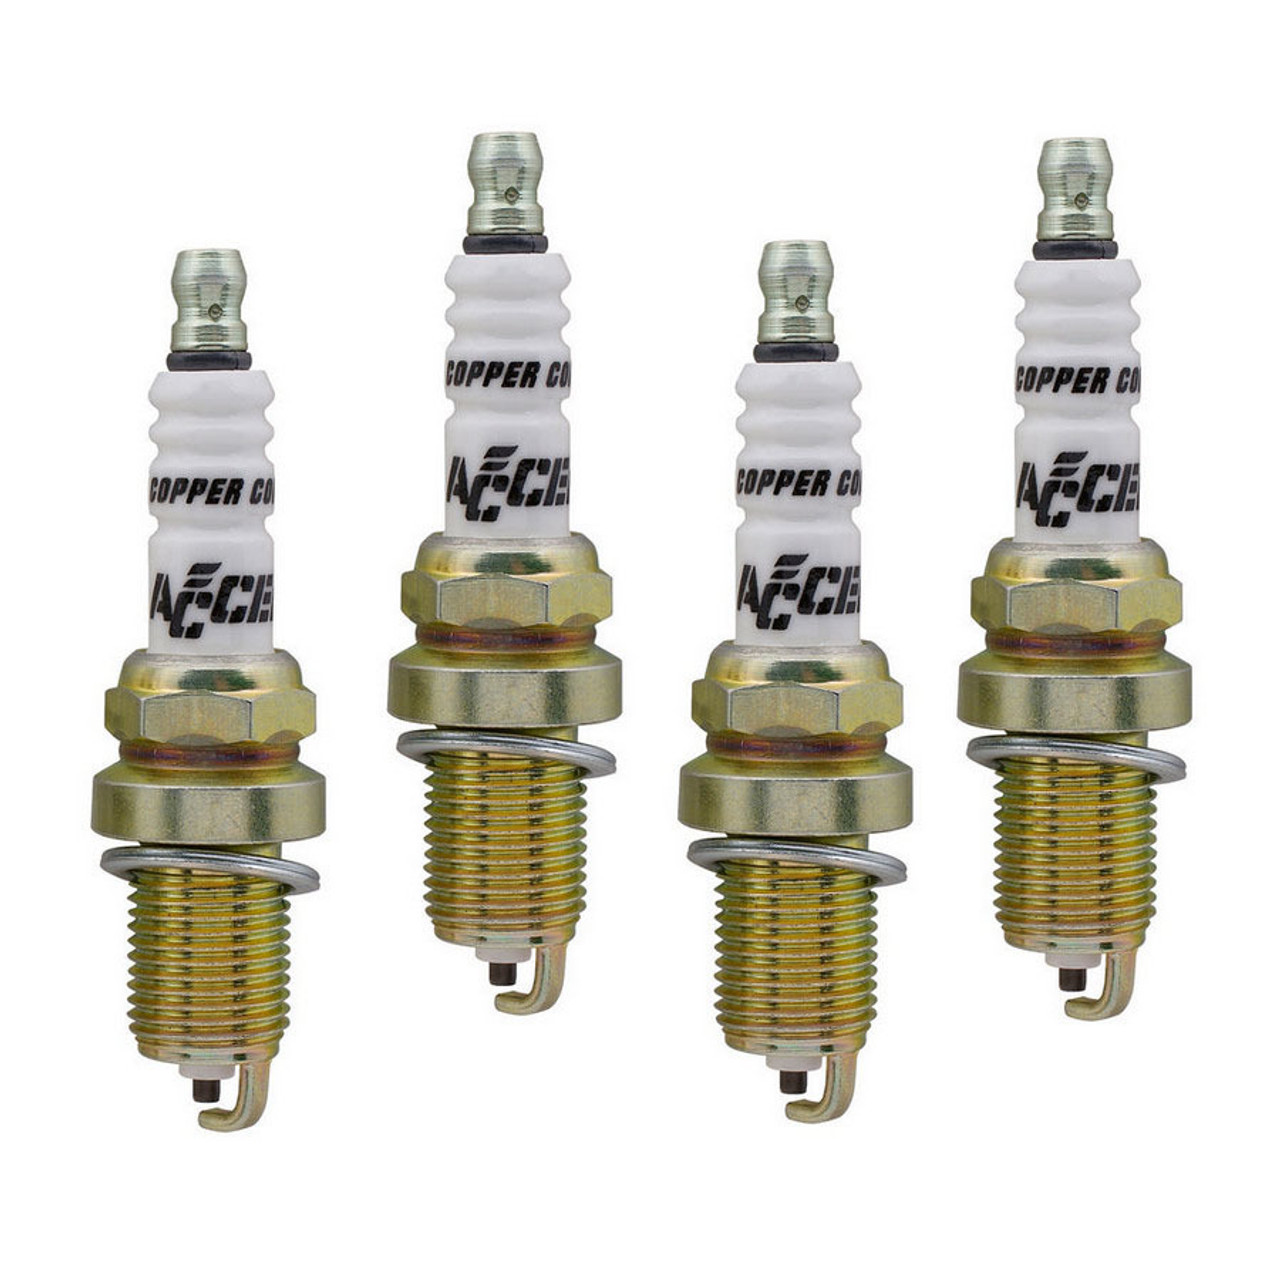 ACL0414S-4, Spark Plug, Shorty, 14 mm Thread, 0.750 in Reach, Gasket Seat, Resistor, Set of 4